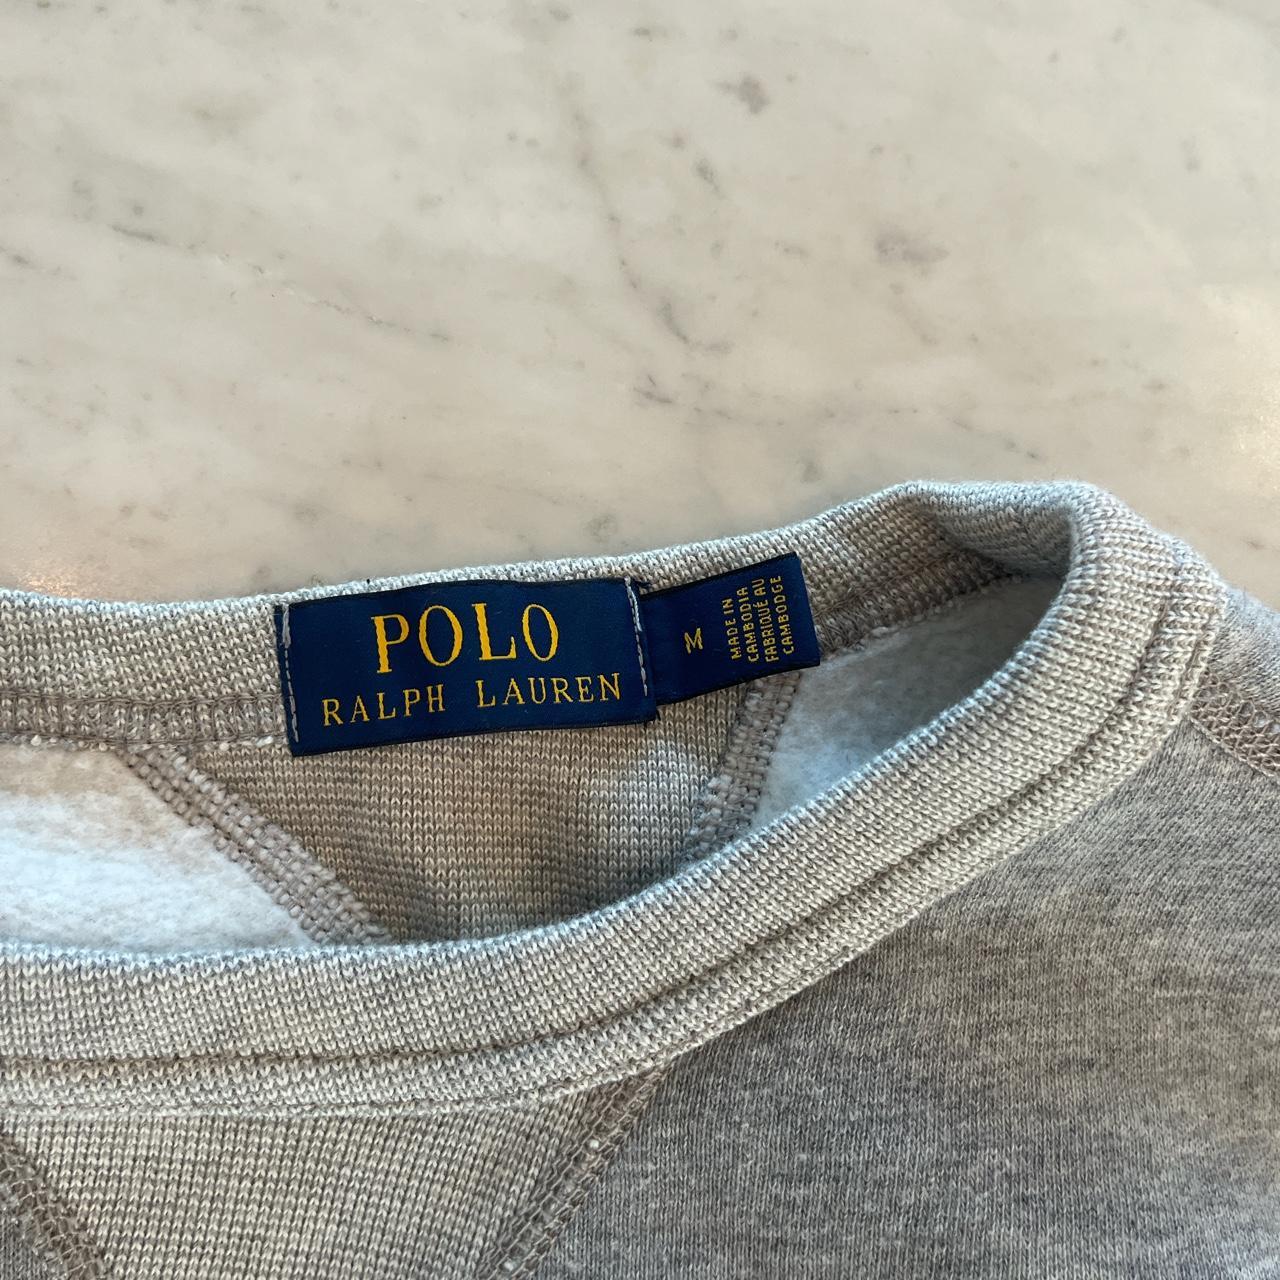 Vintage Polo Ralph Lauren Sweater, with classic... - Depop